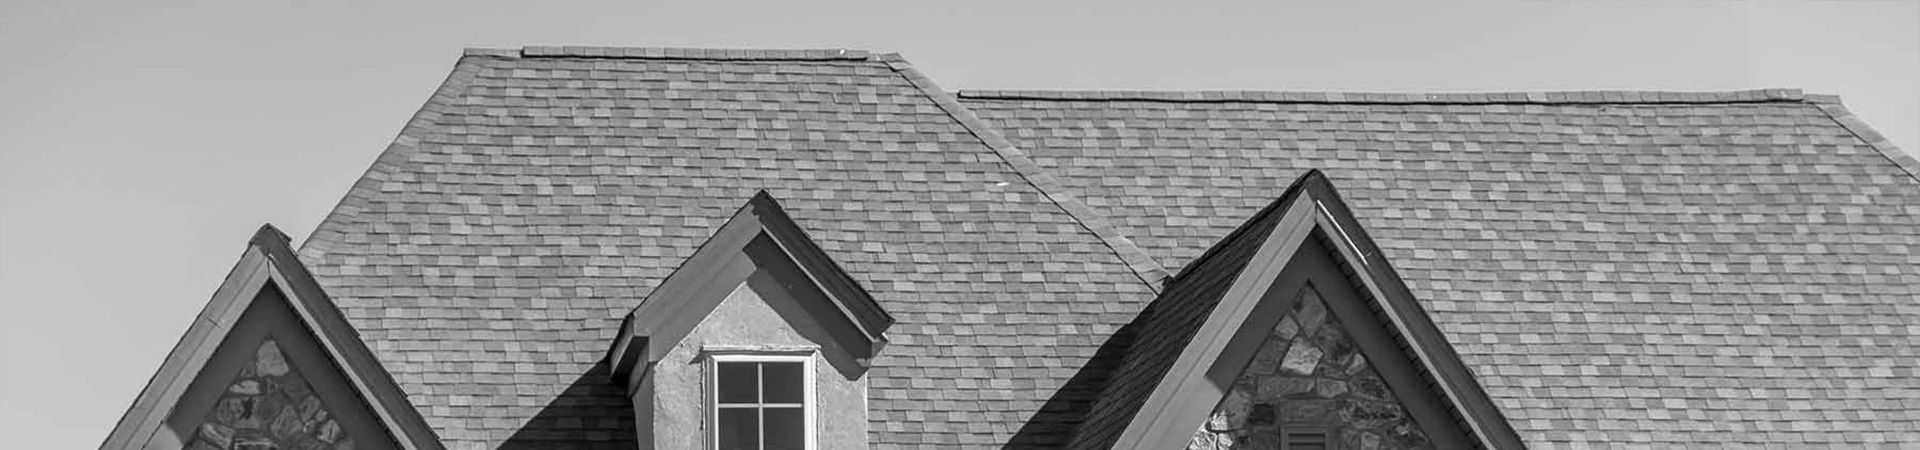 residential-roofing-house-monterey-ca